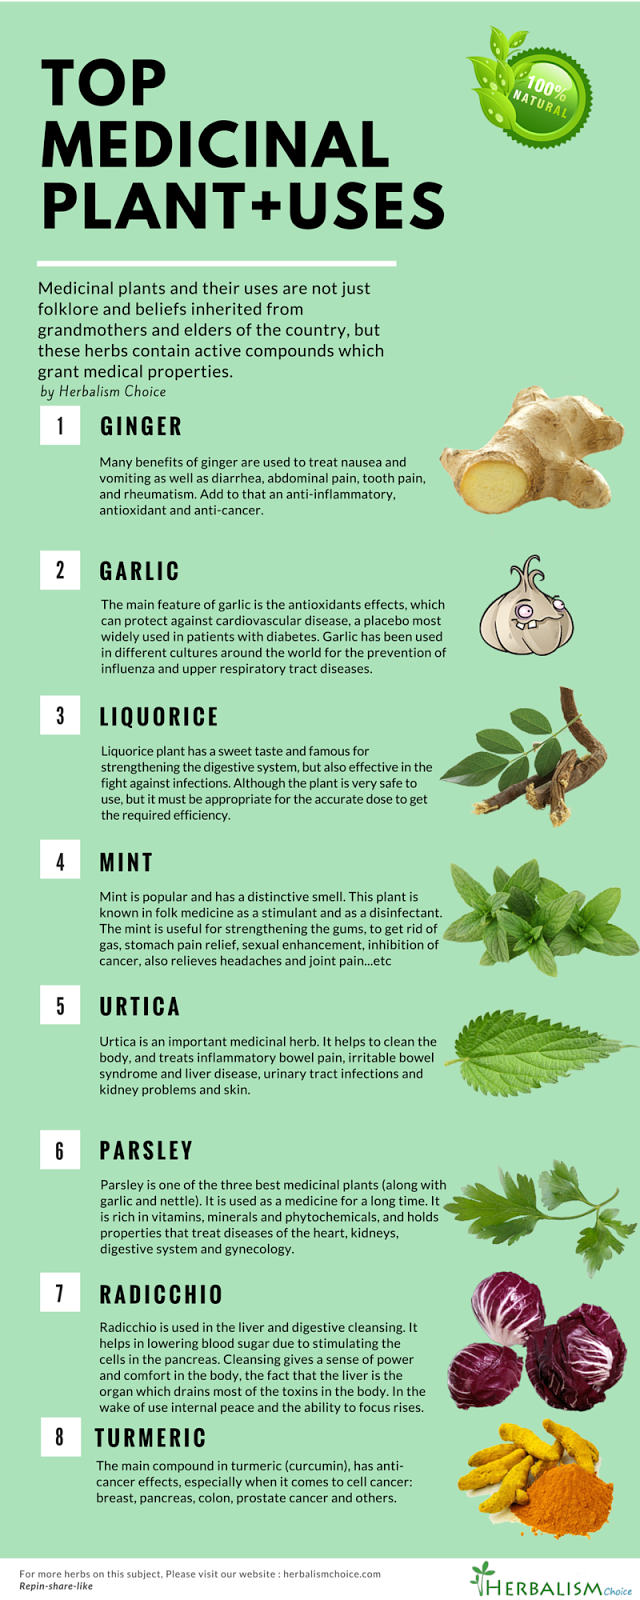 Top medicinal plants and their uses Health & Beauty